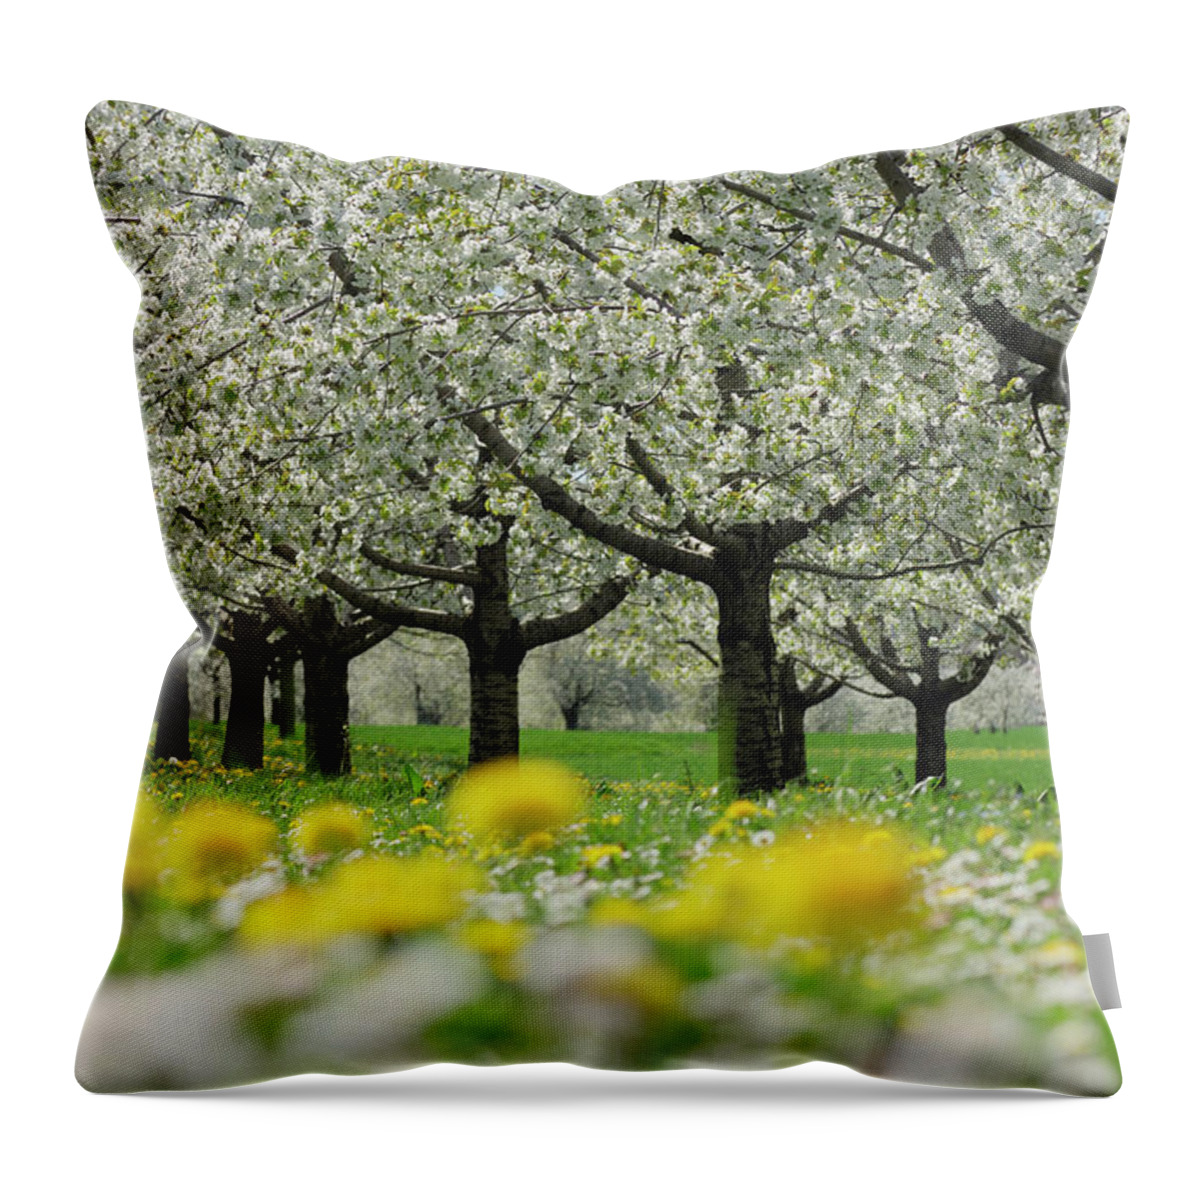 Scenics Throw Pillow featuring the photograph Row Of Cherry Trees In Blossom At A by Martin Ruegner